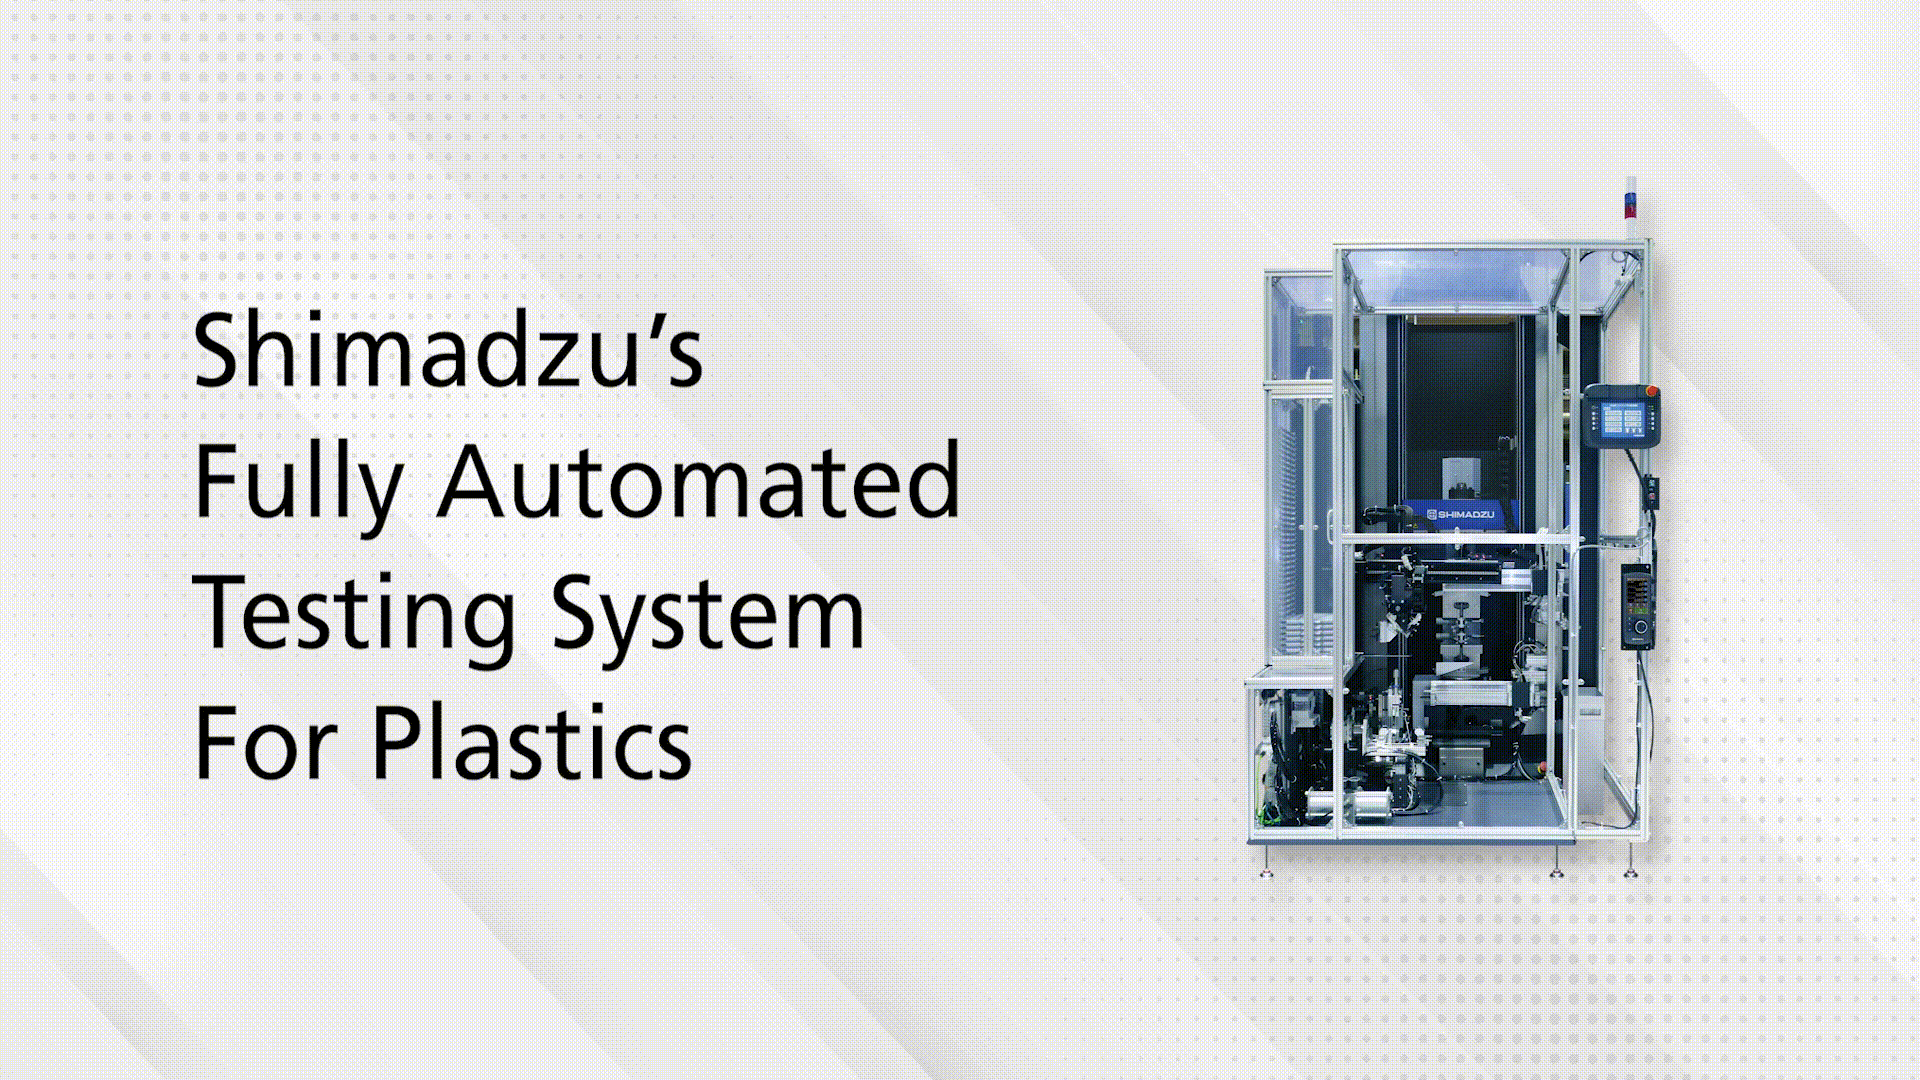 Shimadzu's Fully Automated Testing System for Plastic